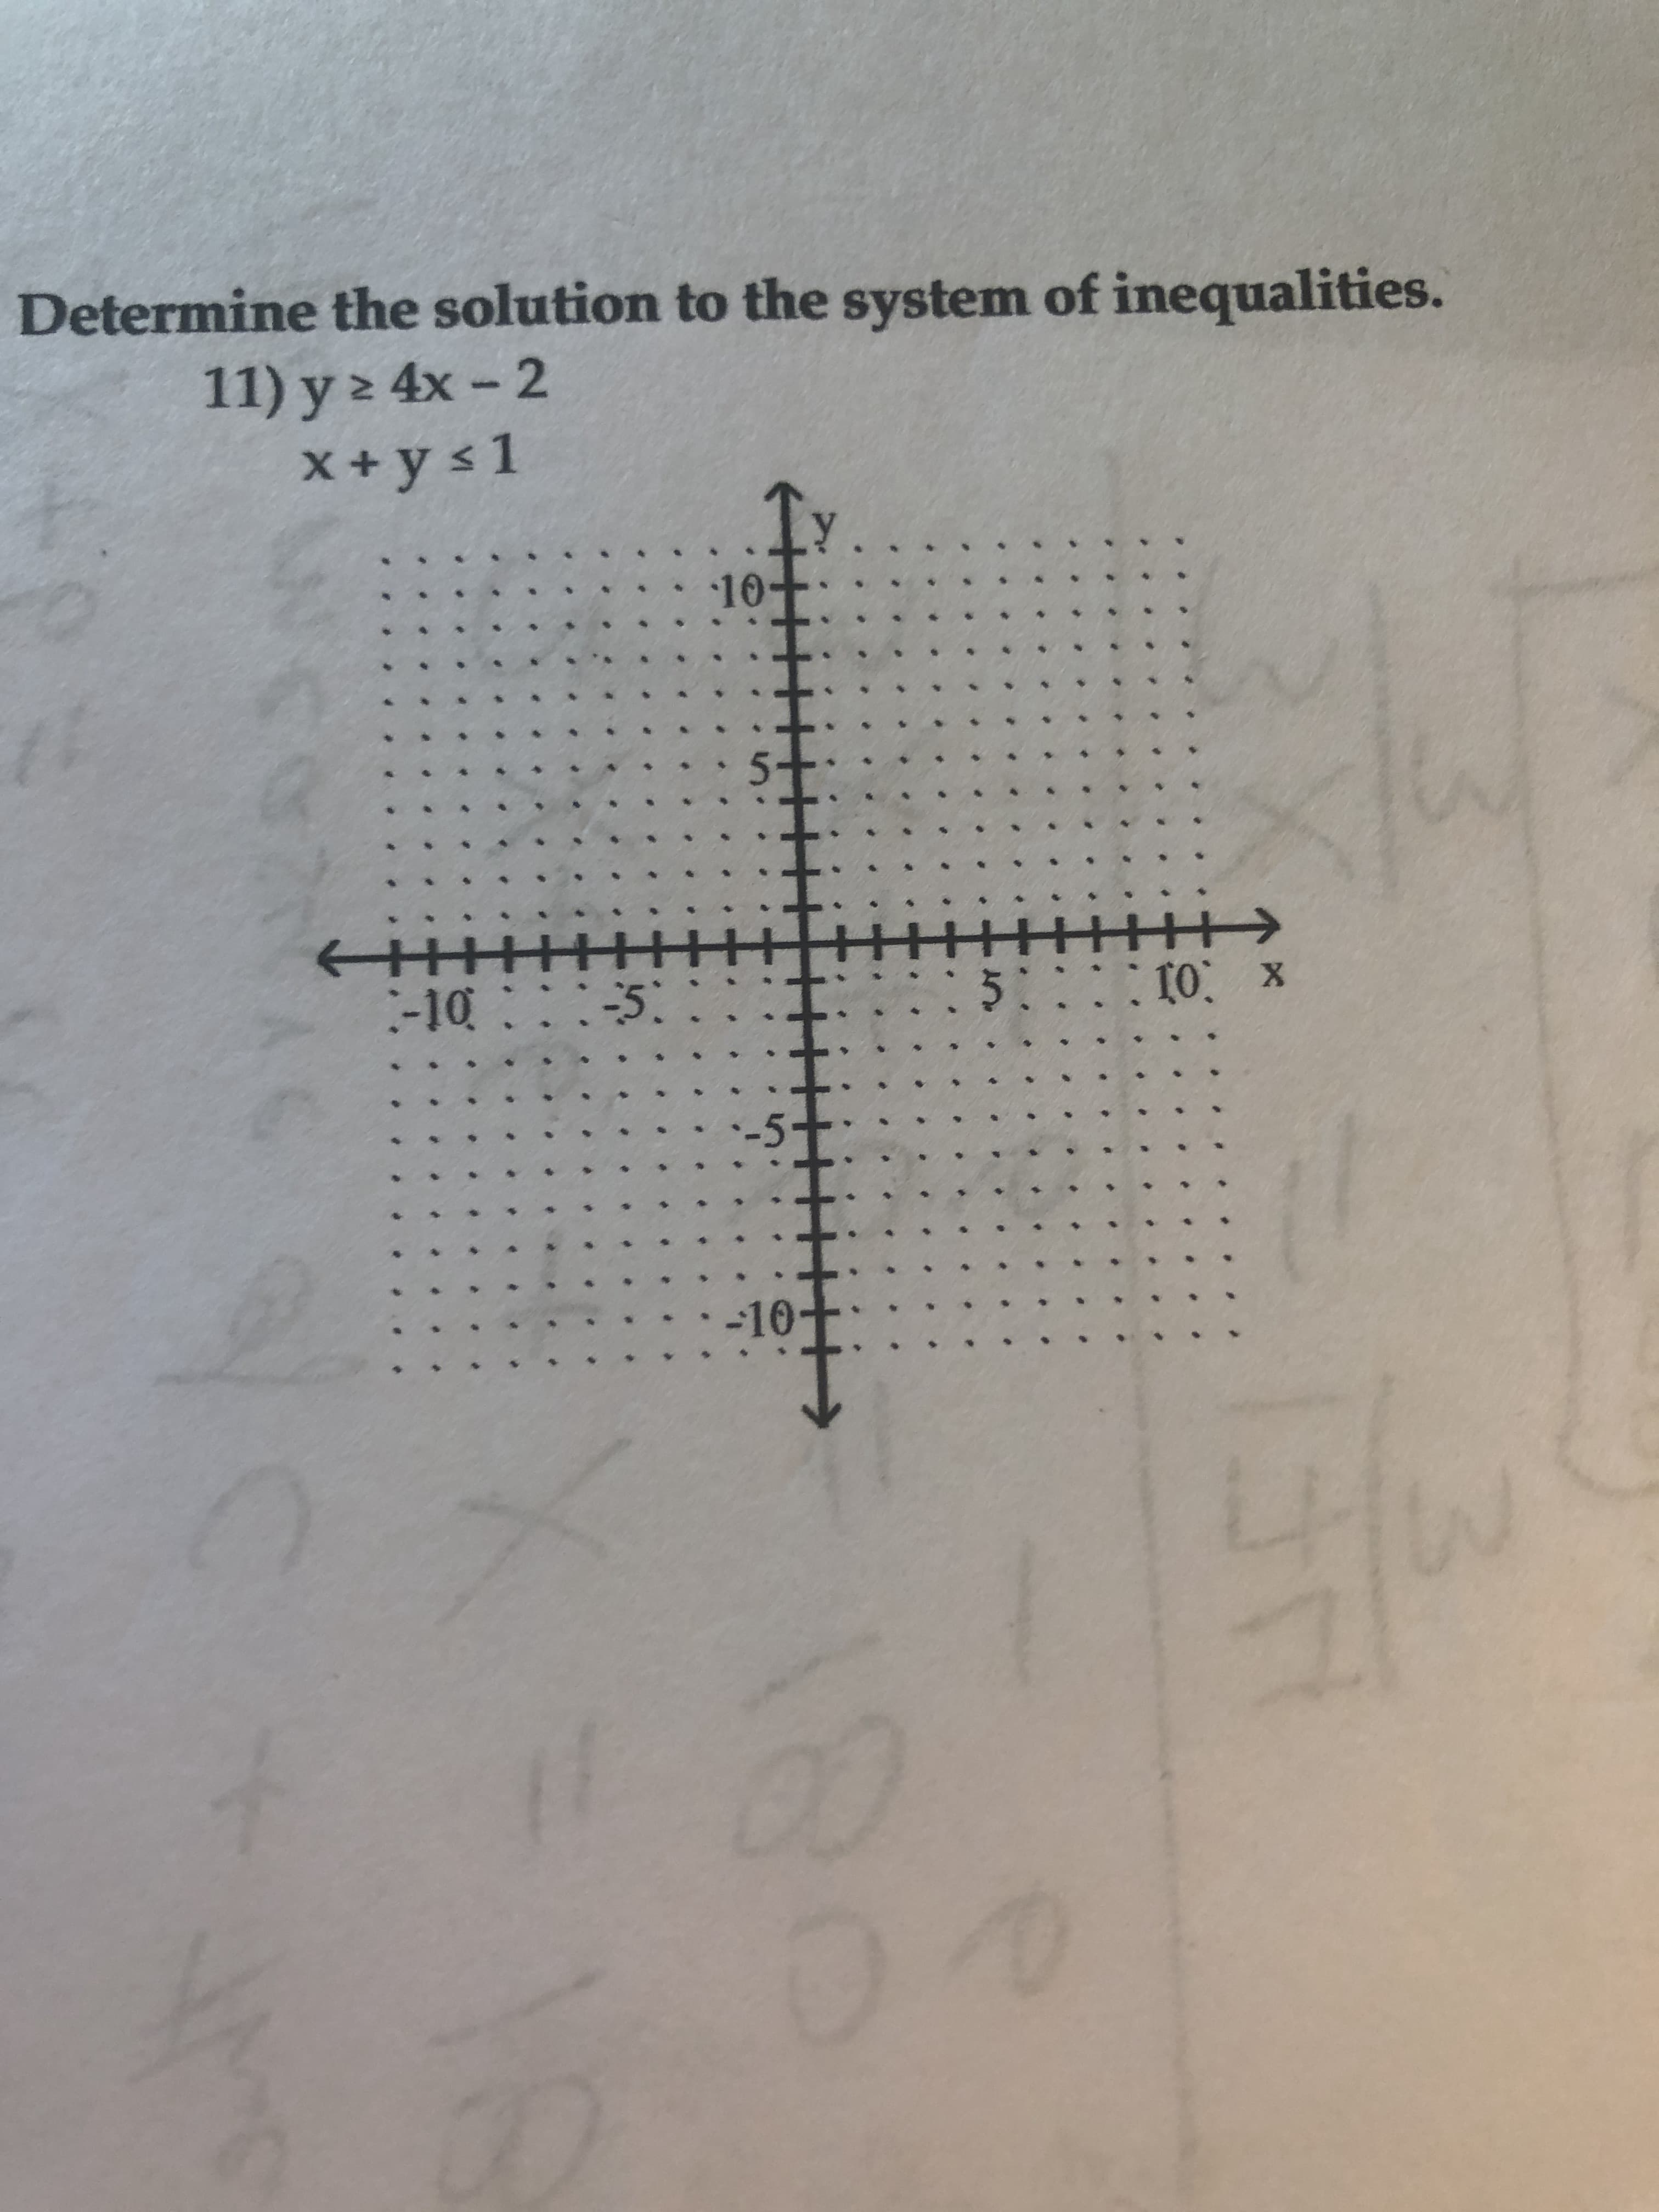 Determine the solution to the system of inequalities.
11) y 2 4x - 2
x+ y s 1
